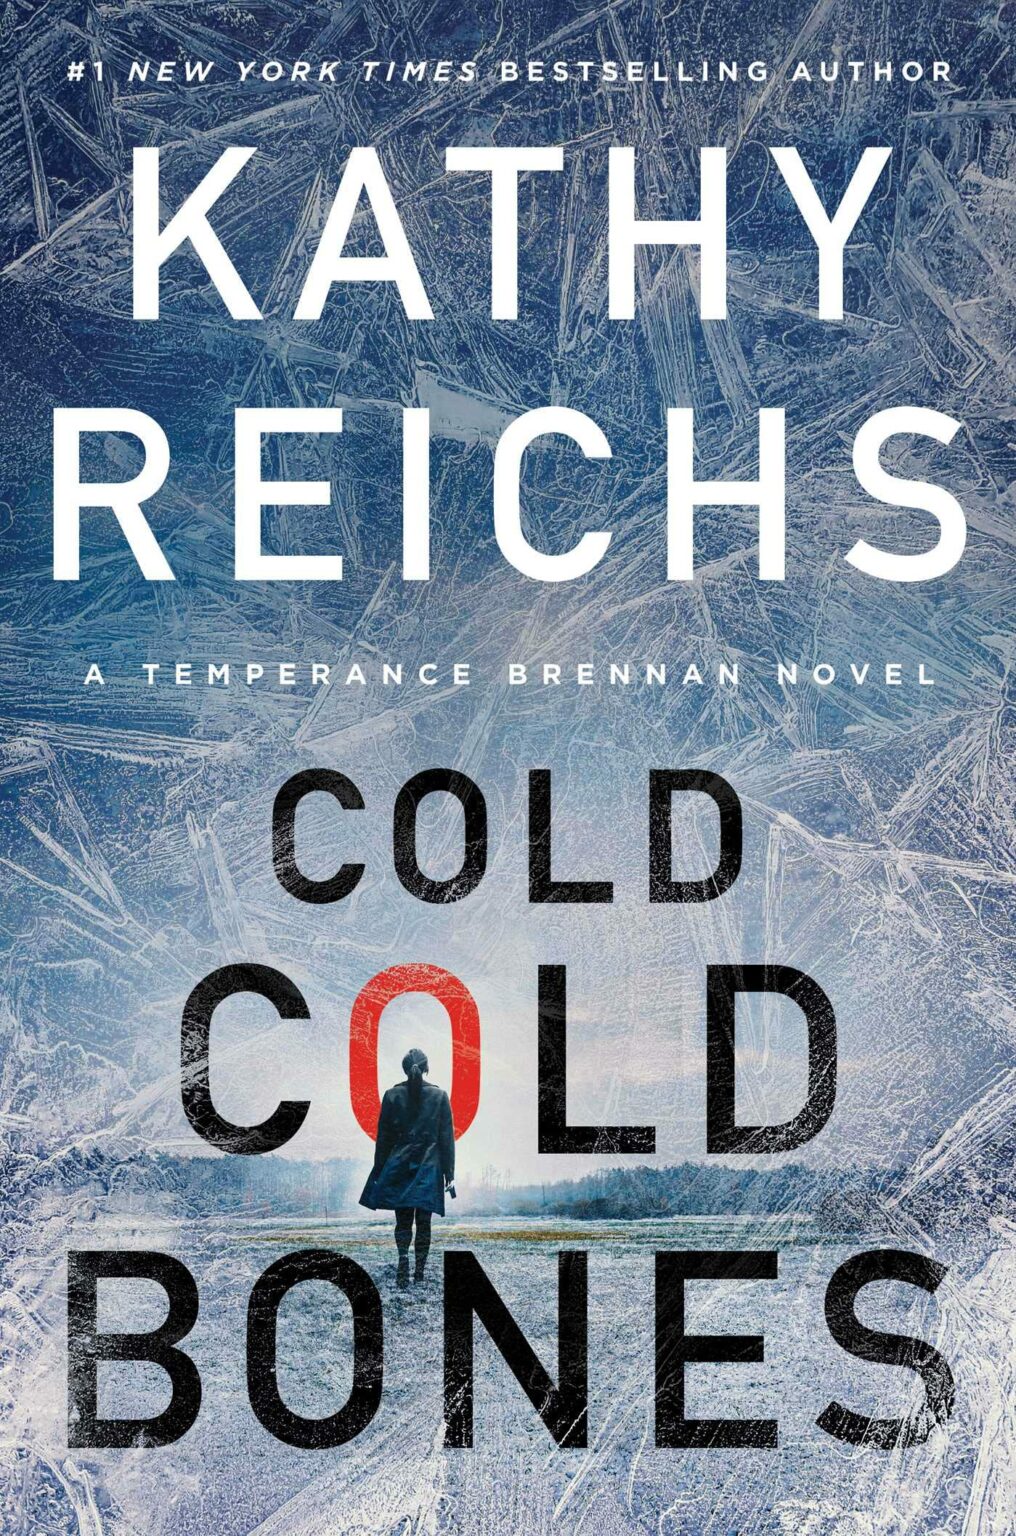 Kathy Reichs 2023 Releases Kathy Reichs 2023/2024 Next Book Releases